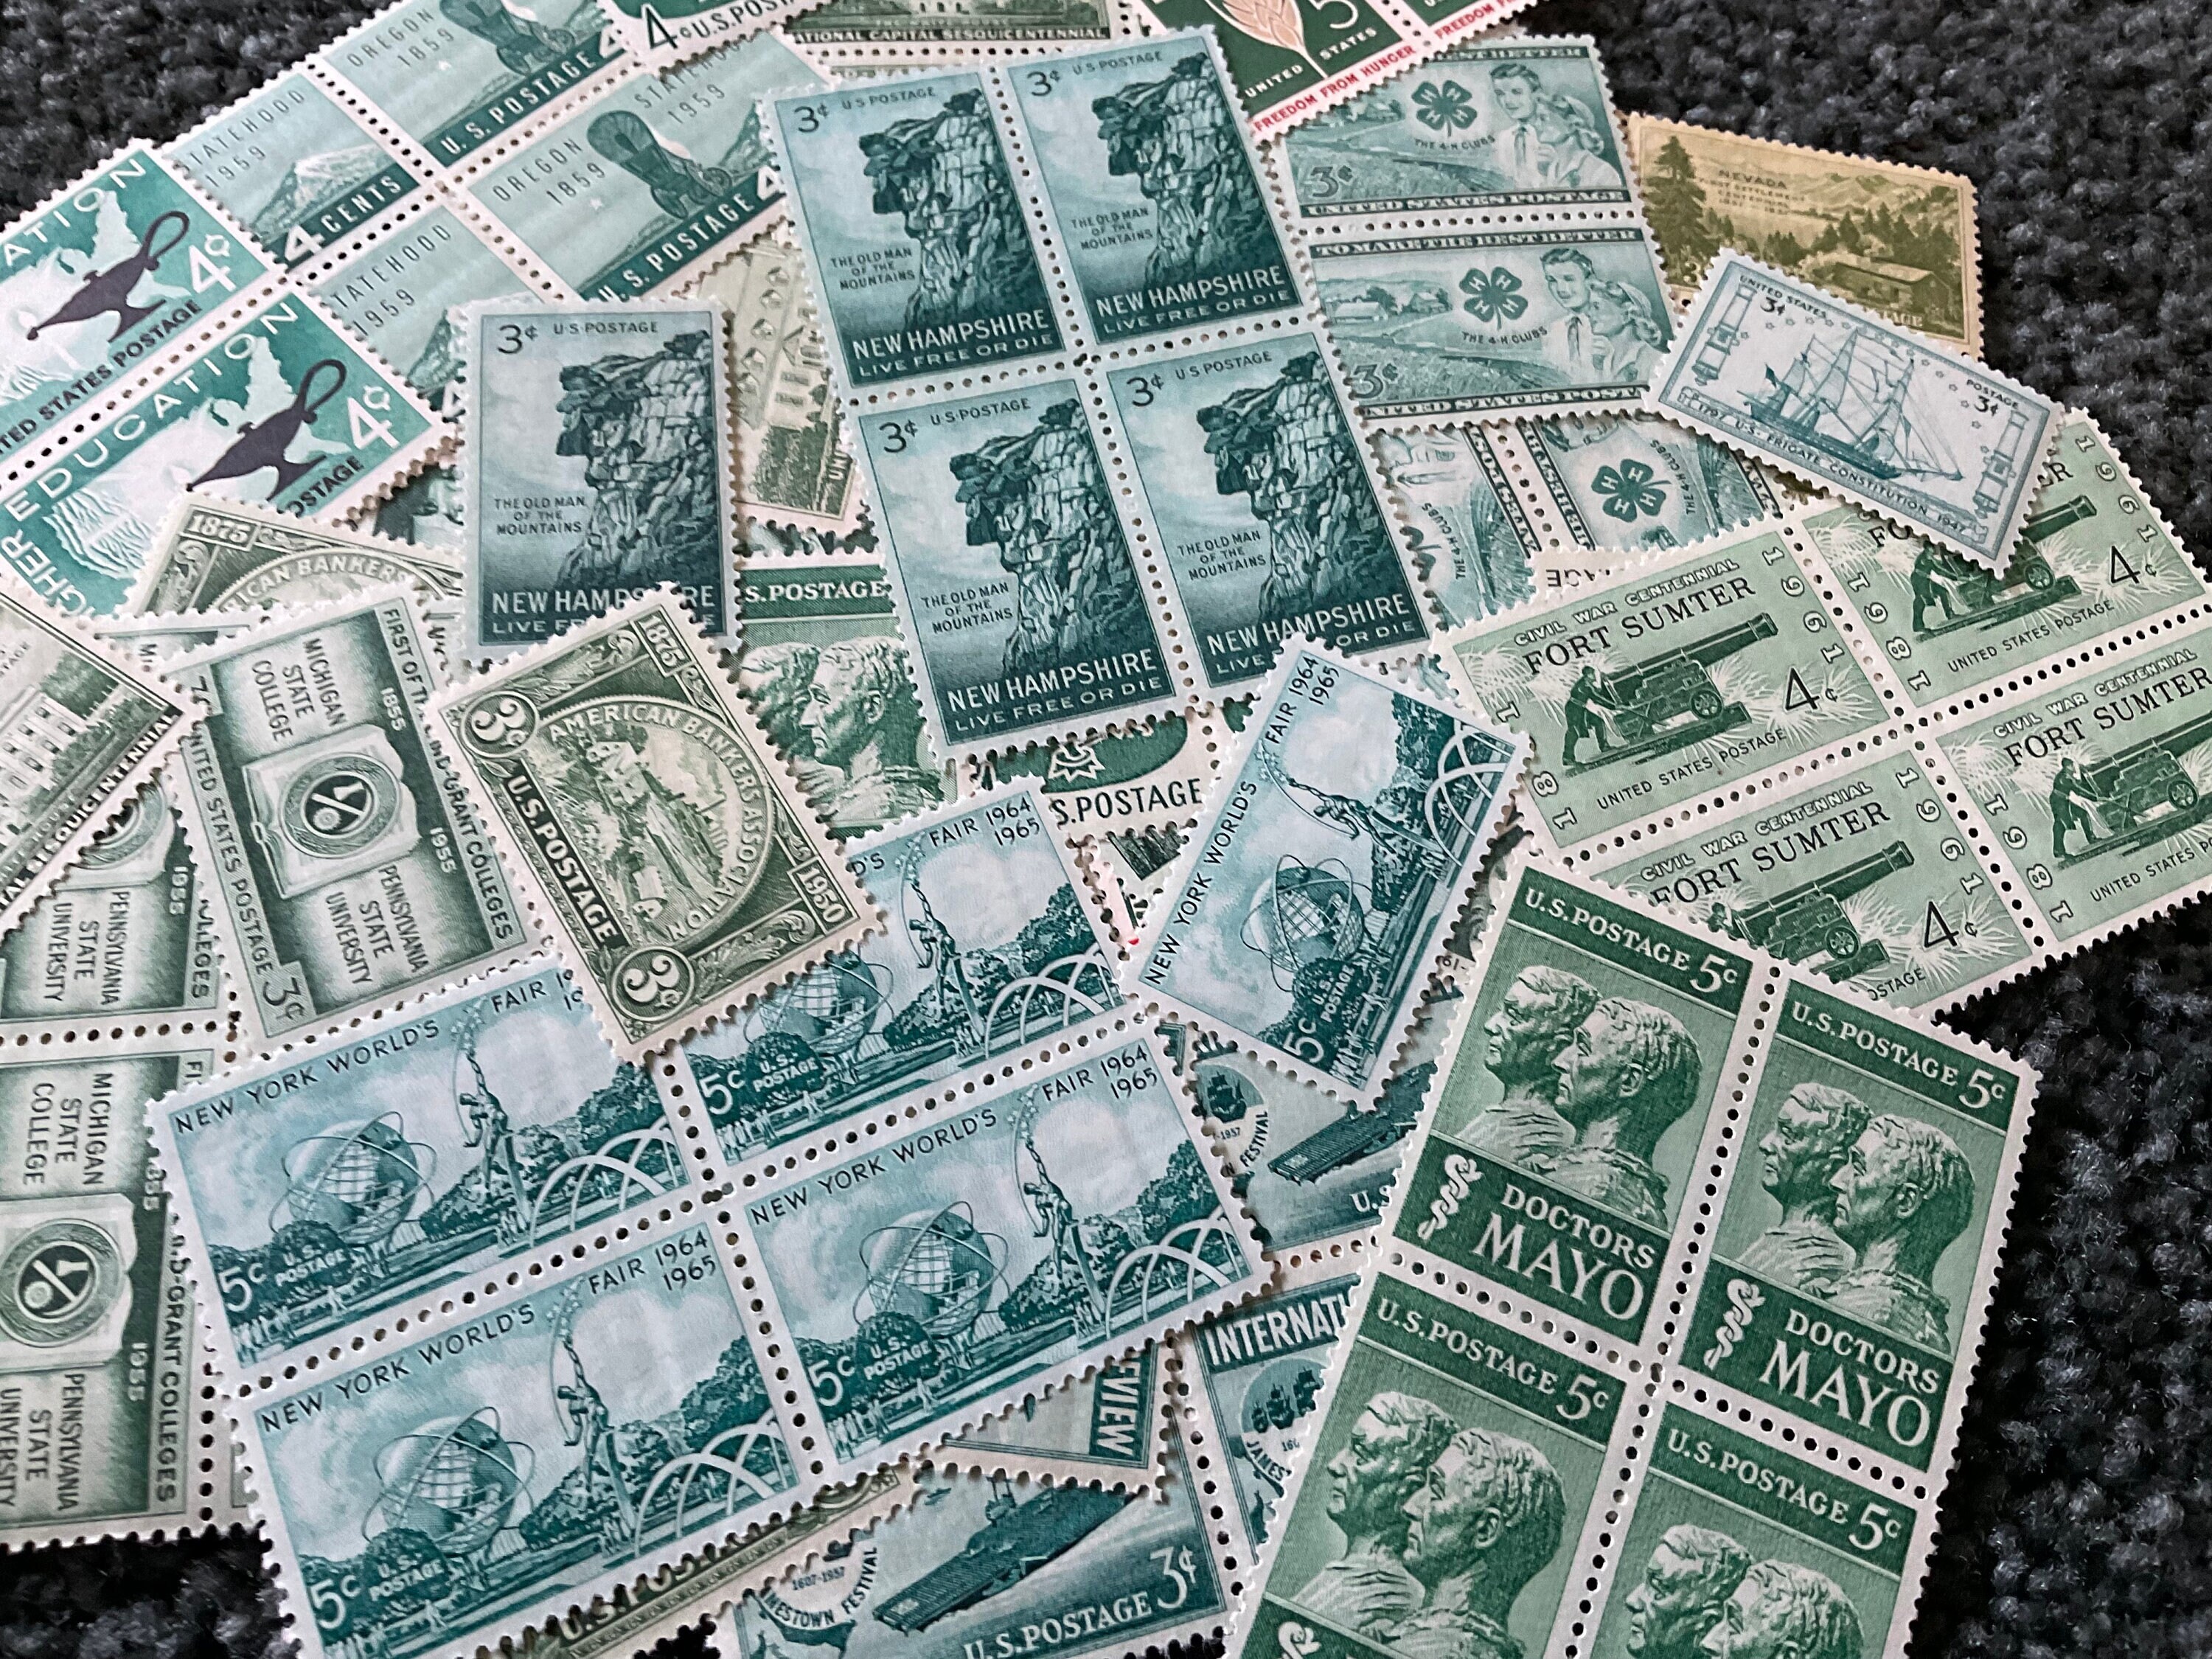 92 cents . Green Vintage Postage Stamp Variety Pack . Set of 5 Marketplace  Postage Stamps by undefined